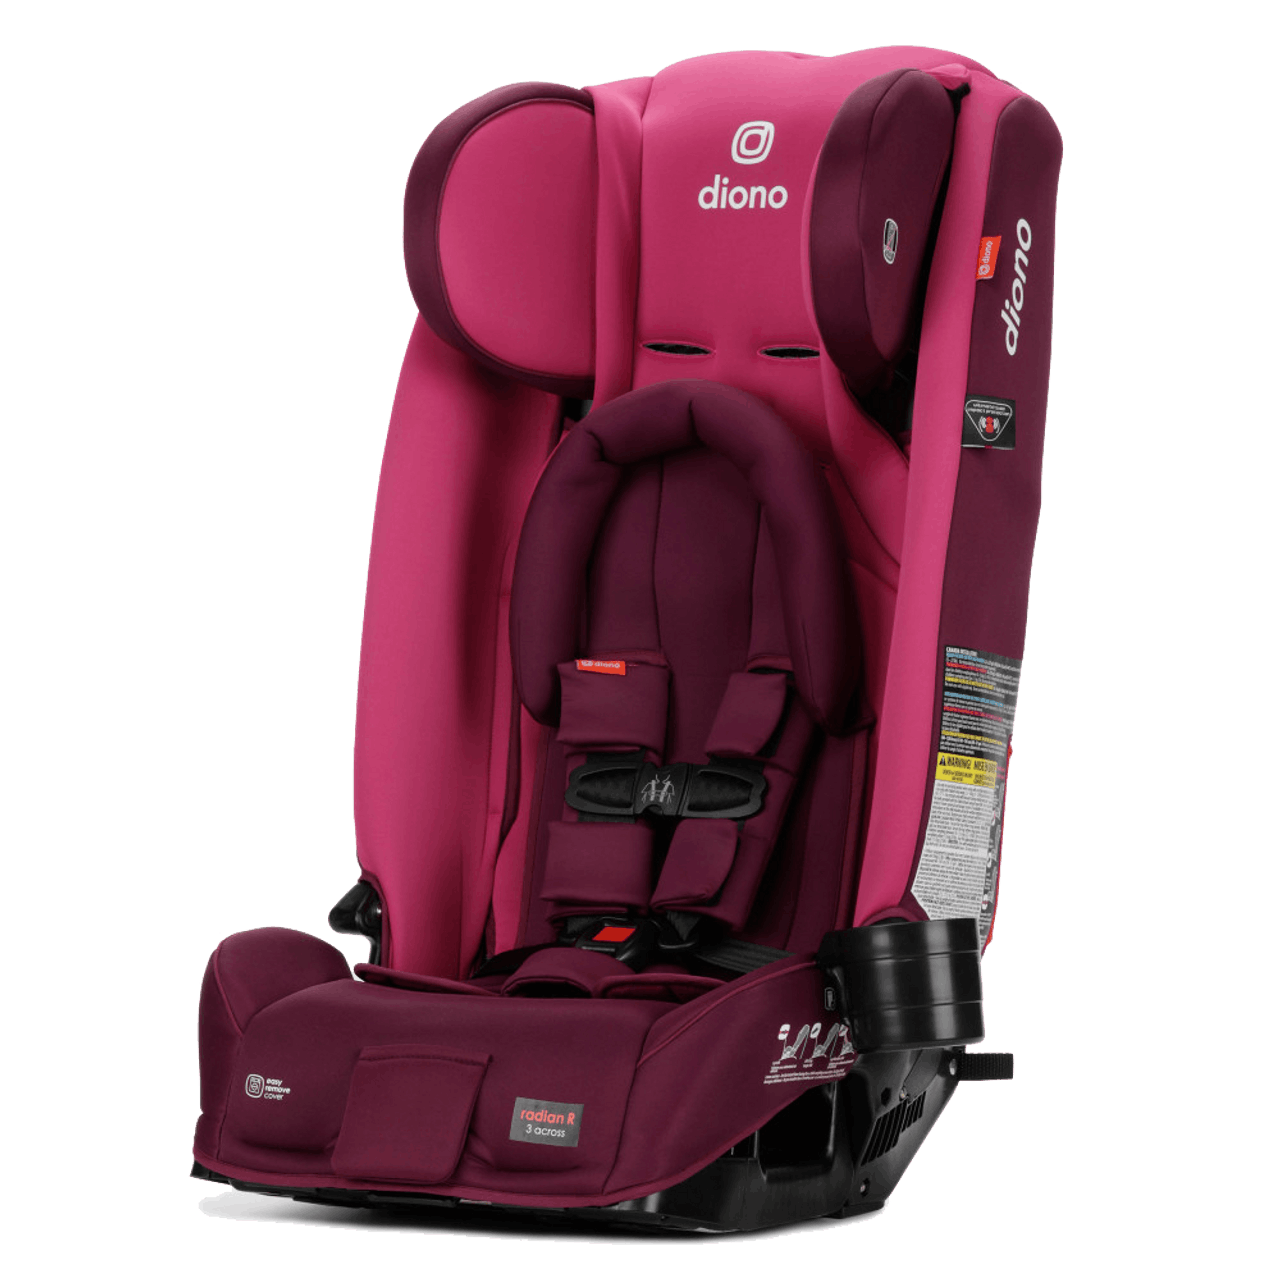 Diono Radian® 3RX All-in-One Convertible Car Seat